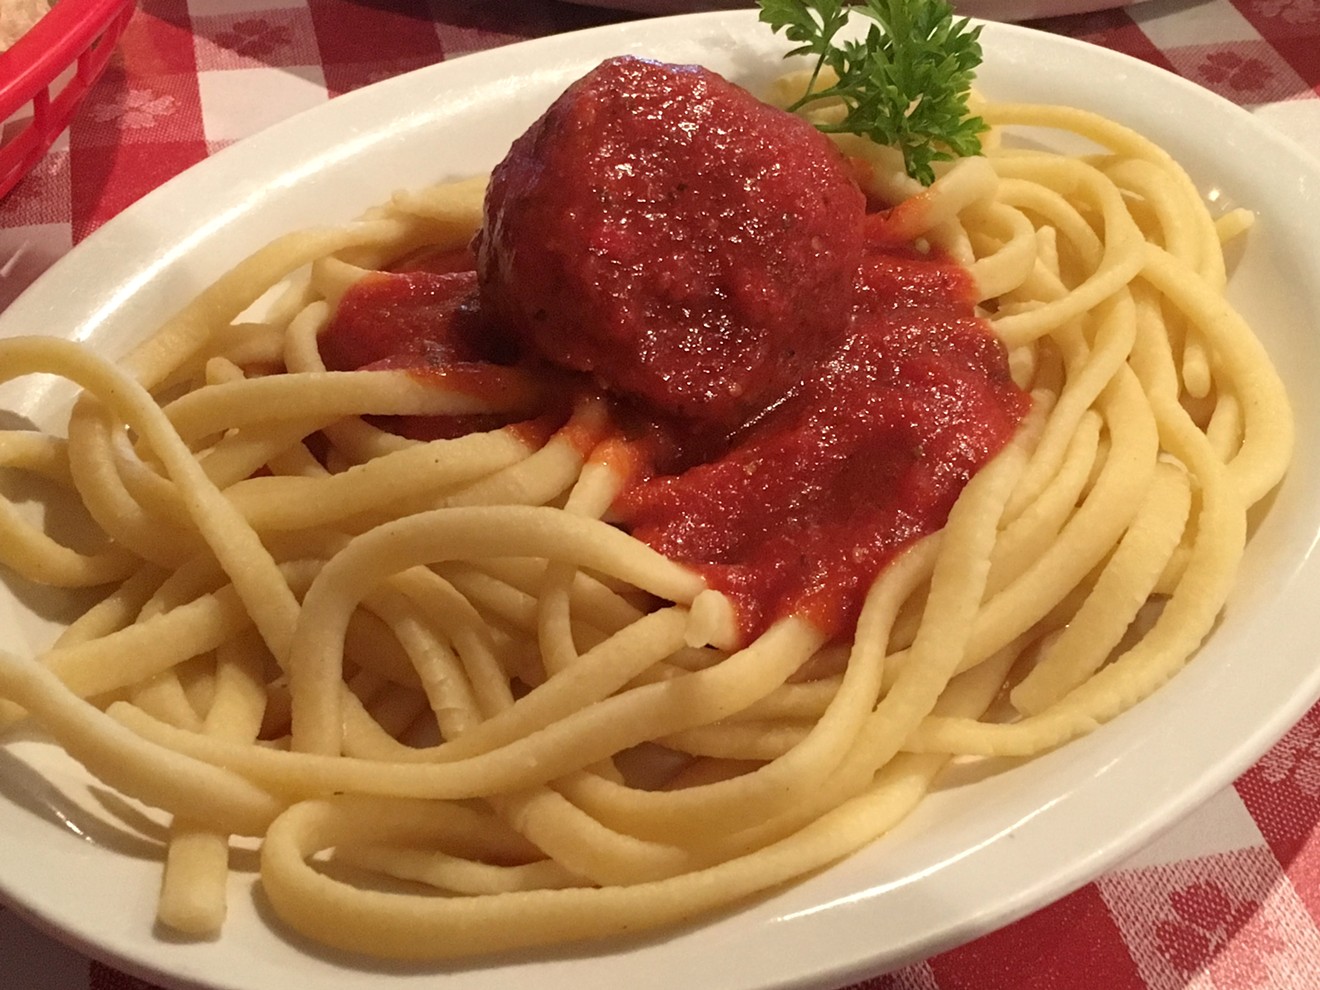 The "homemade noodles" plate at Dino's comes with sausage or a meatball and a side of extra sauce.